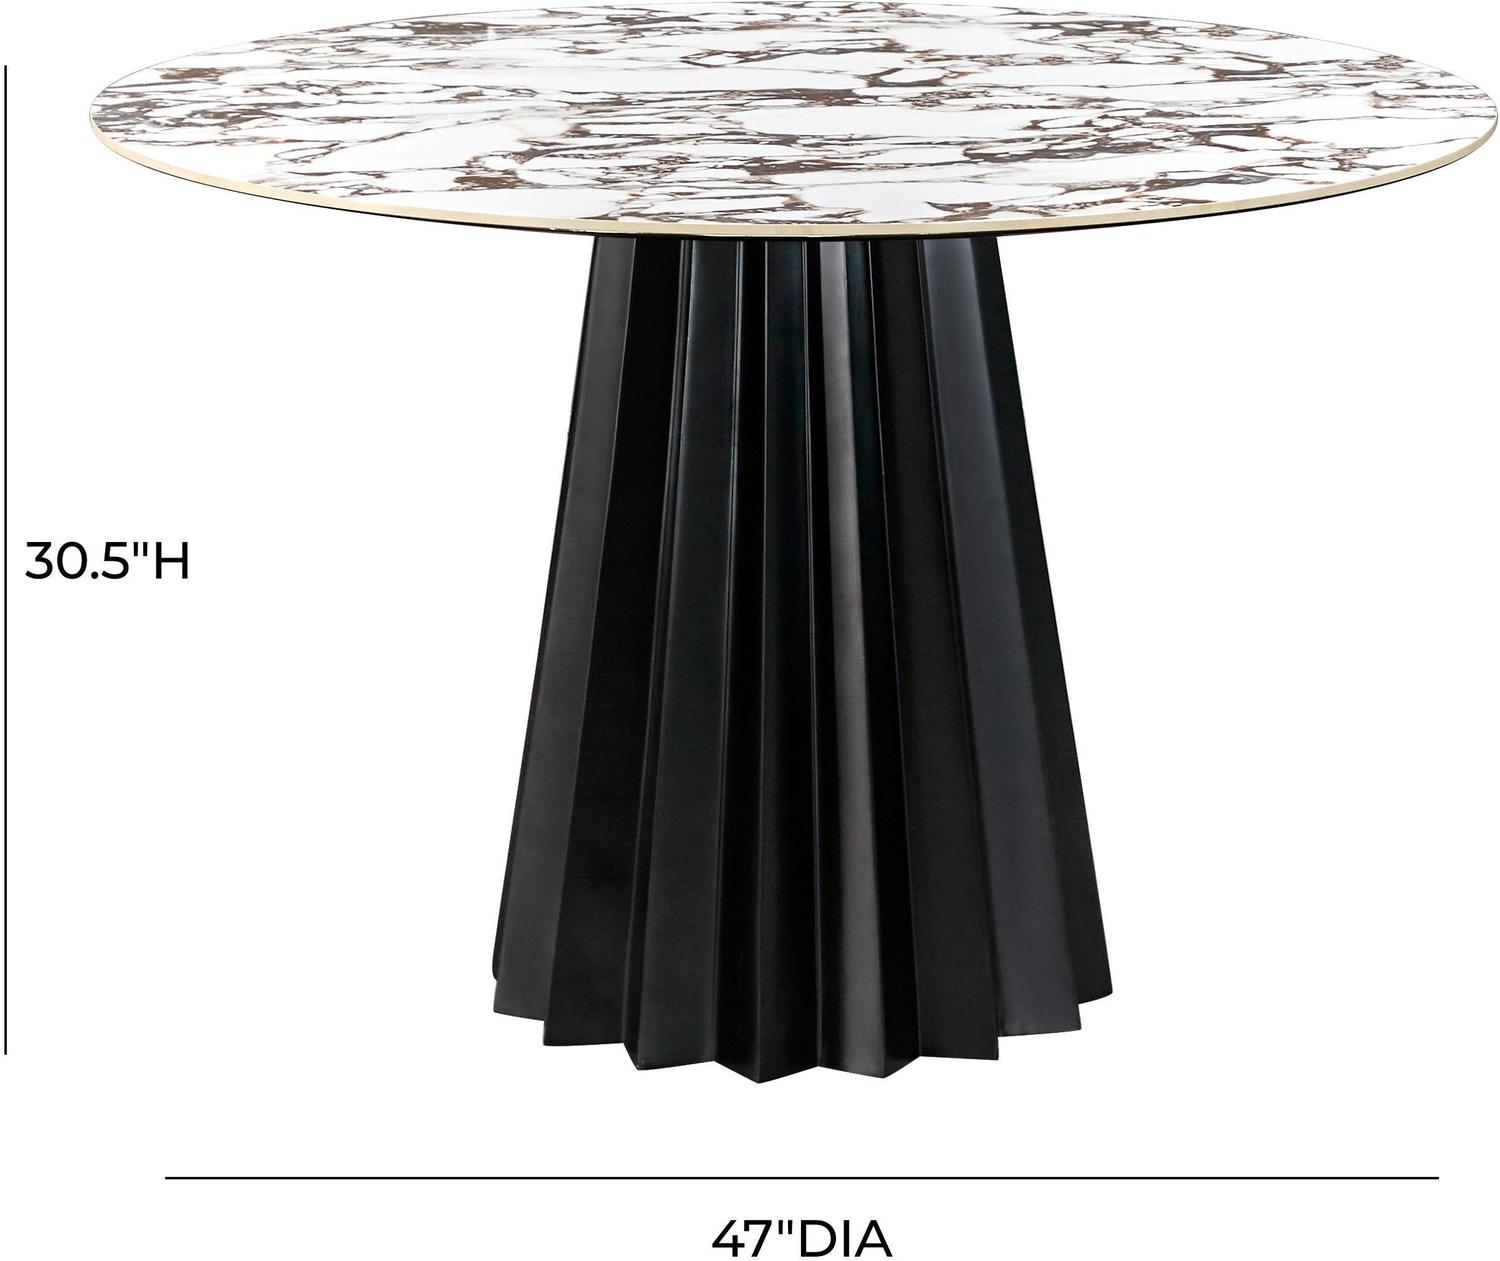 grey round dining table set Contemporary Design Furniture Dining Tables Black,White Marble